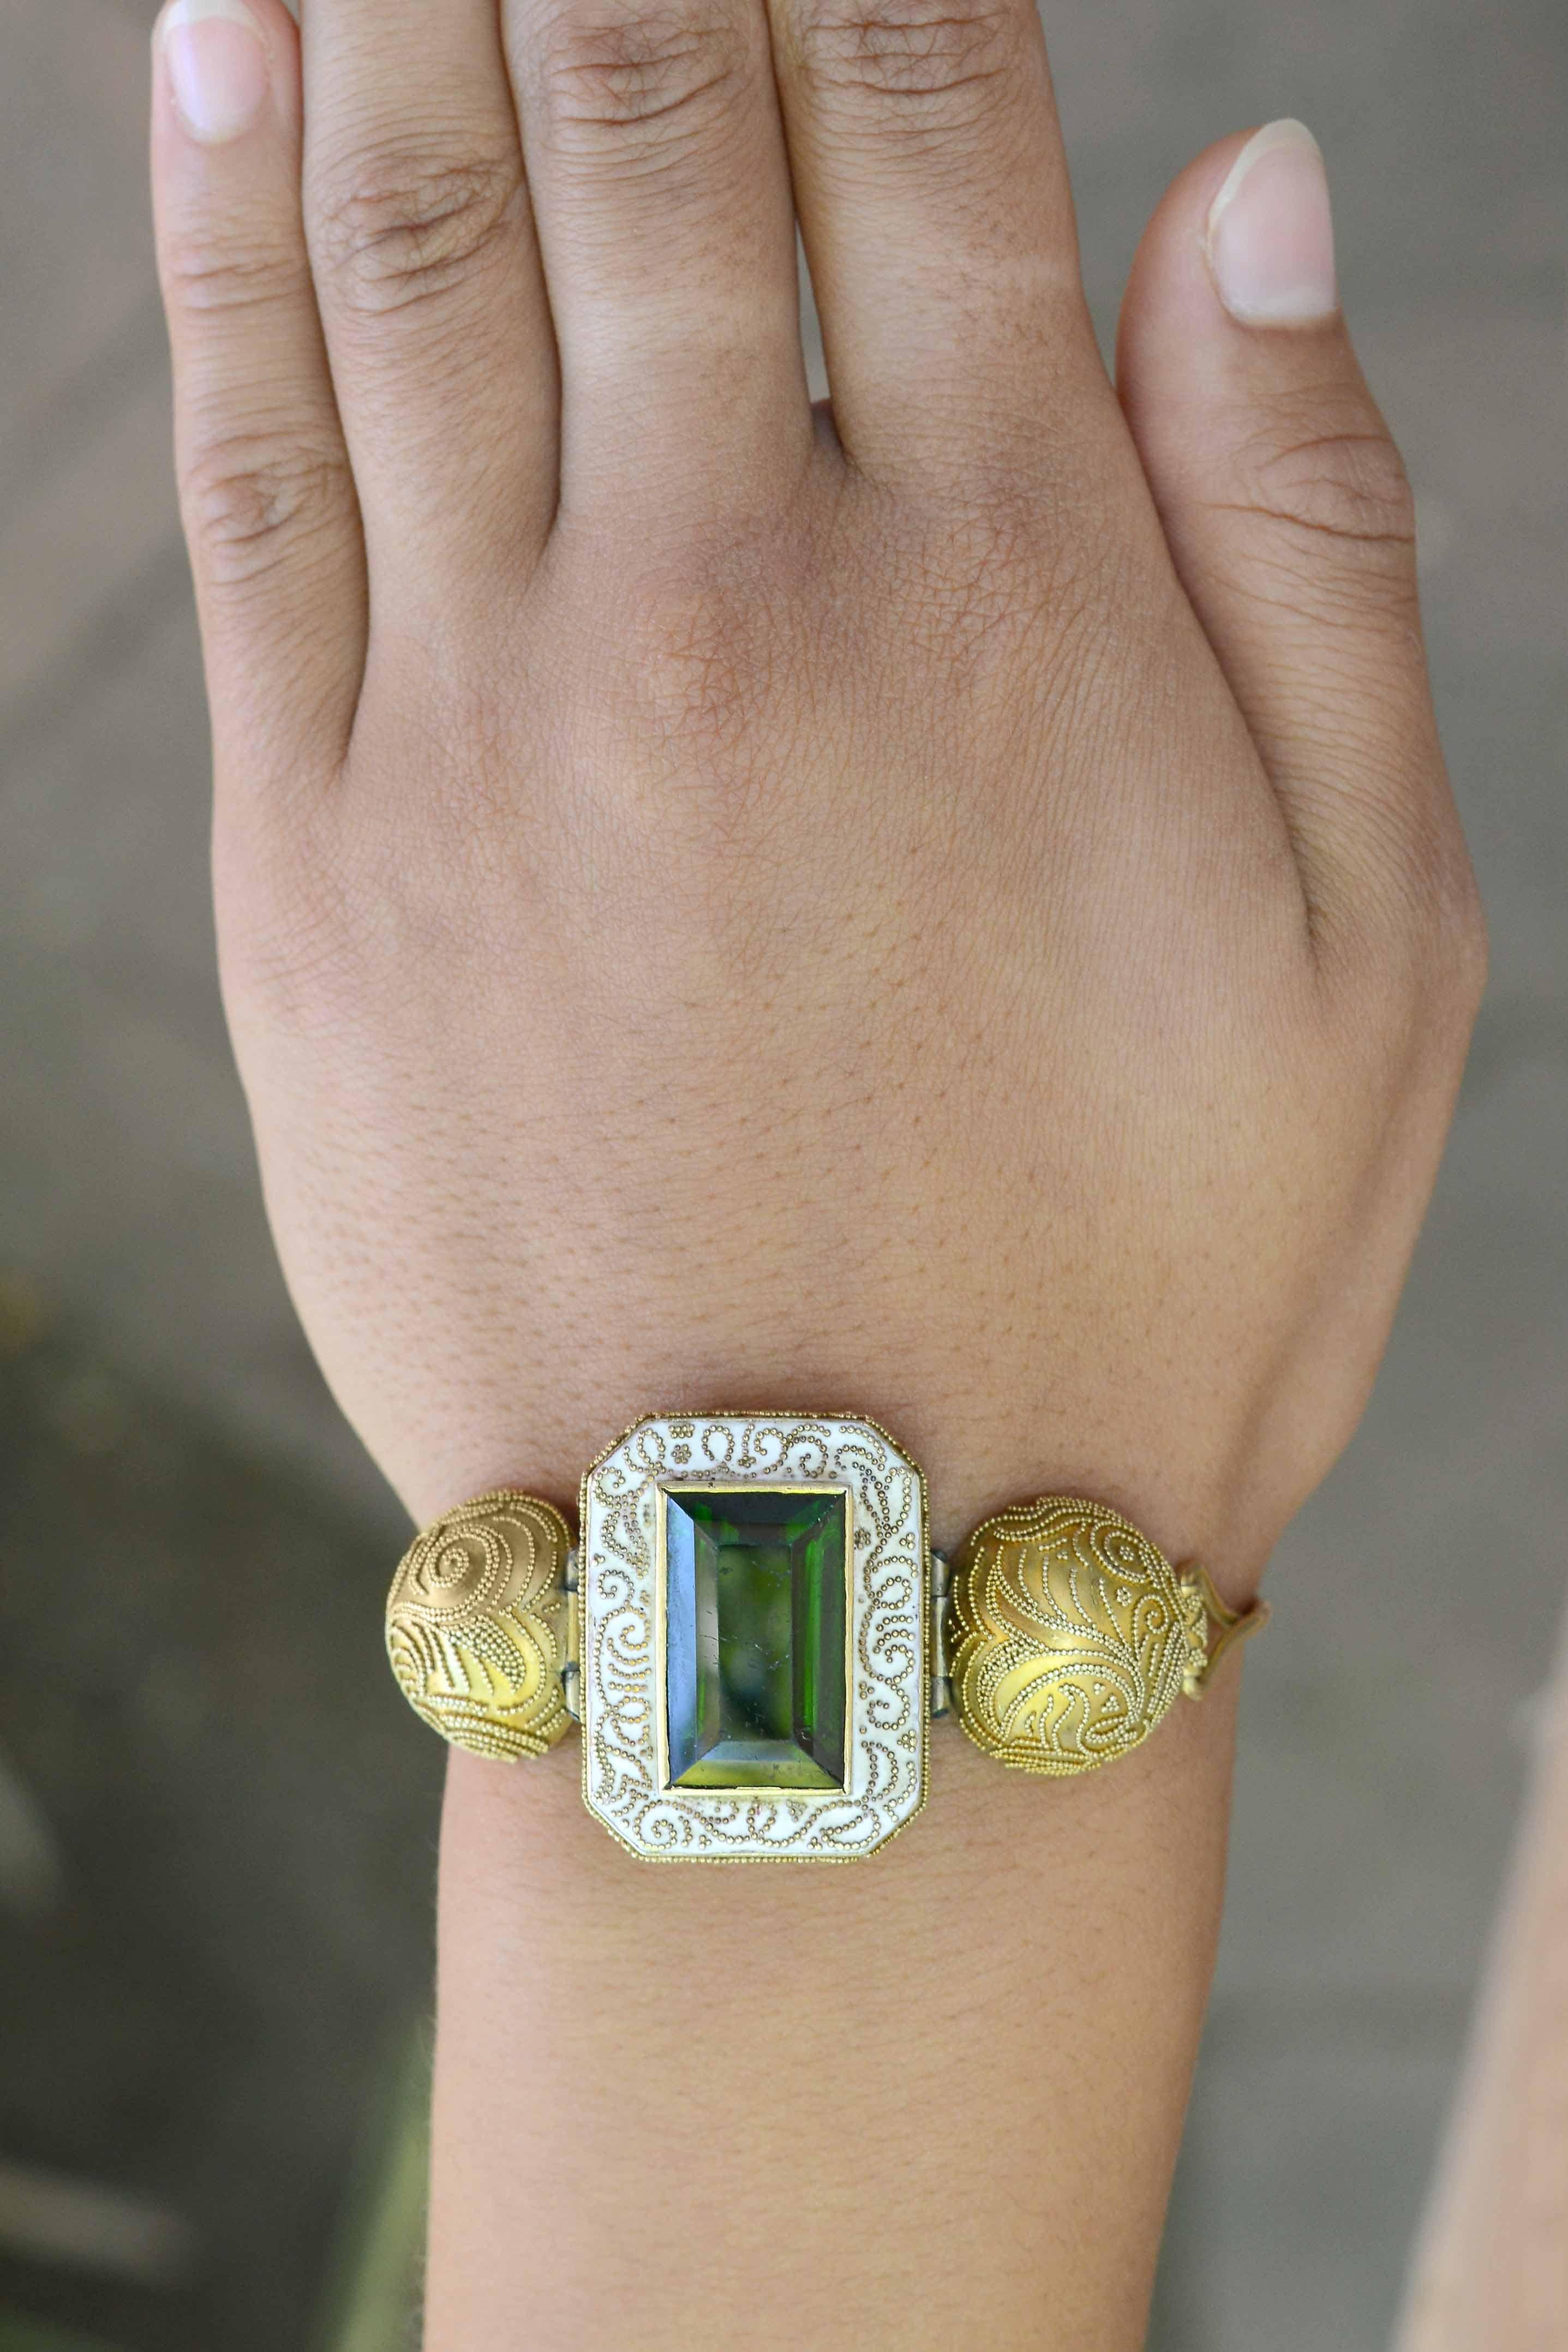 Centered by a significant 23 carat green tourmaline, this incredible antique Victorian Etruscan revival bracelet has that 